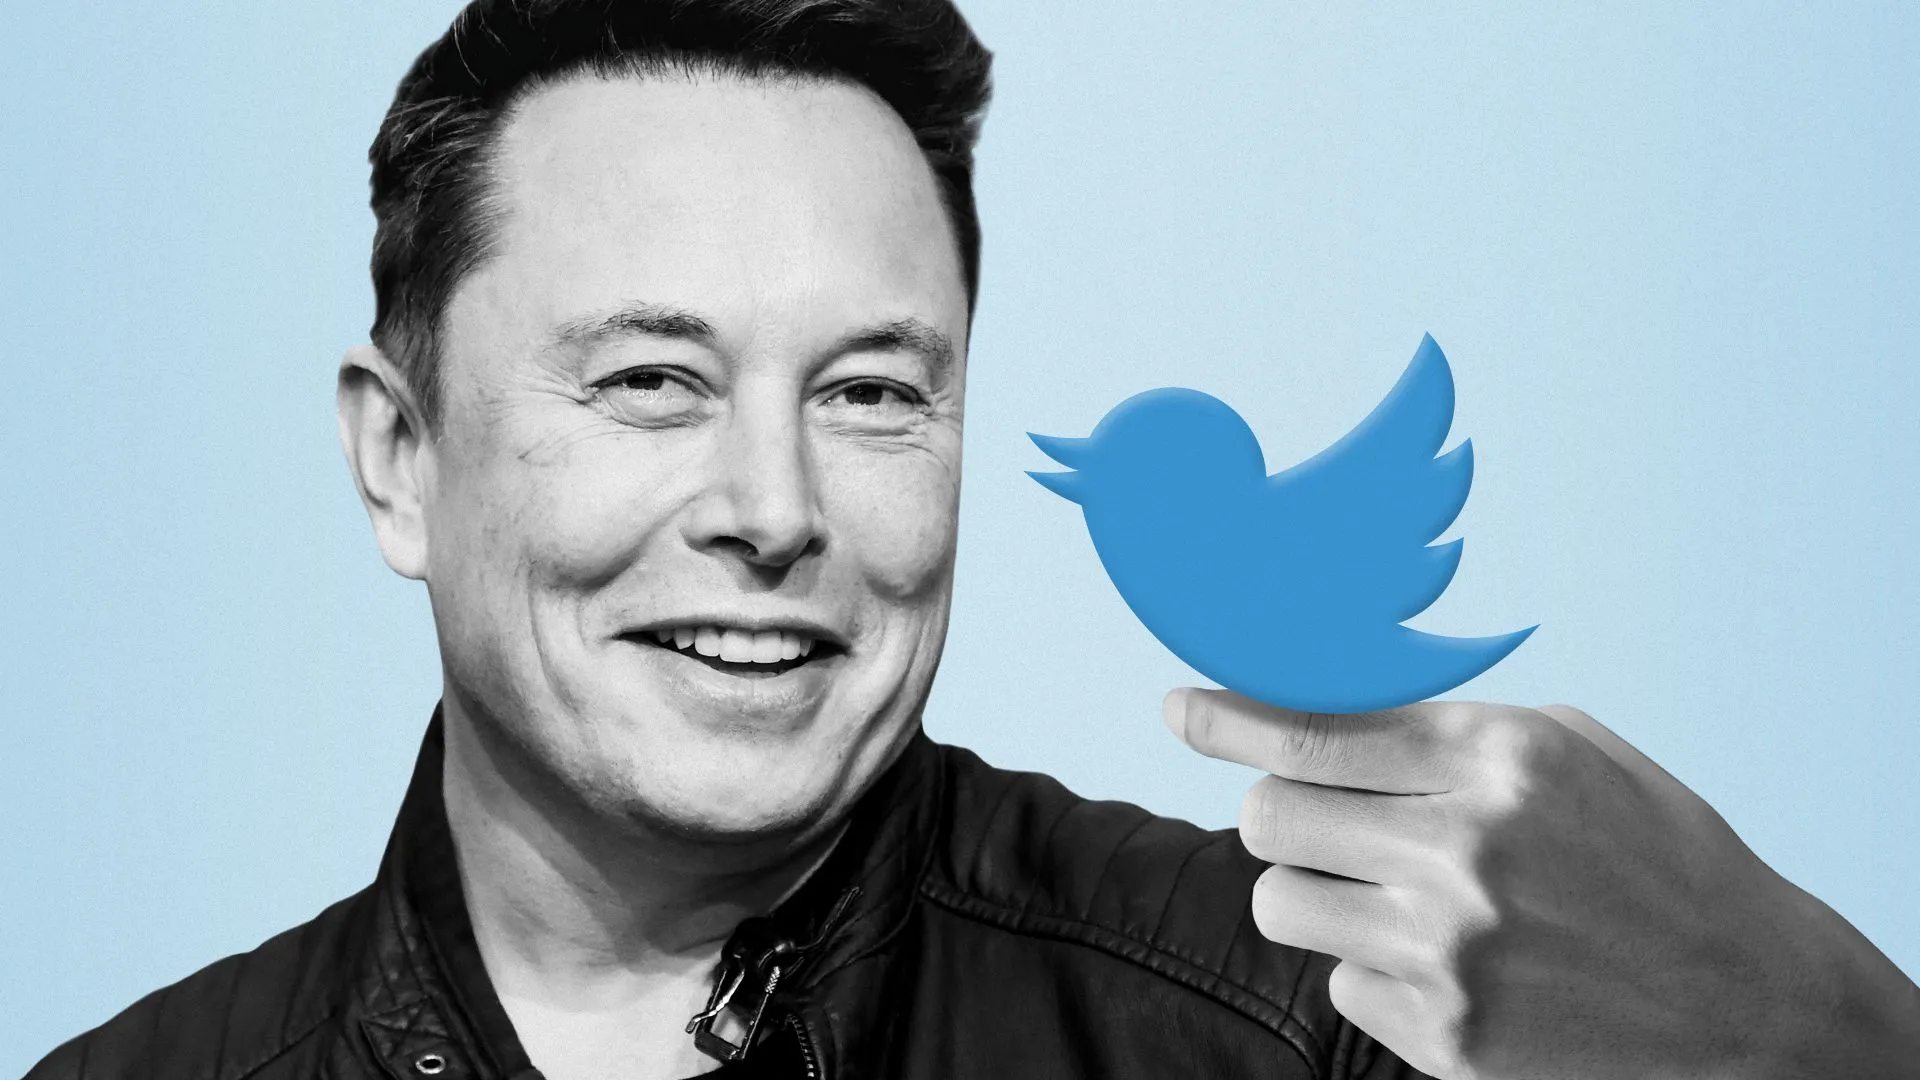 Elon Musk's Bold Move at Twitter: How Teamwork and Defiance Protected User Data and Dodged FTC Fines